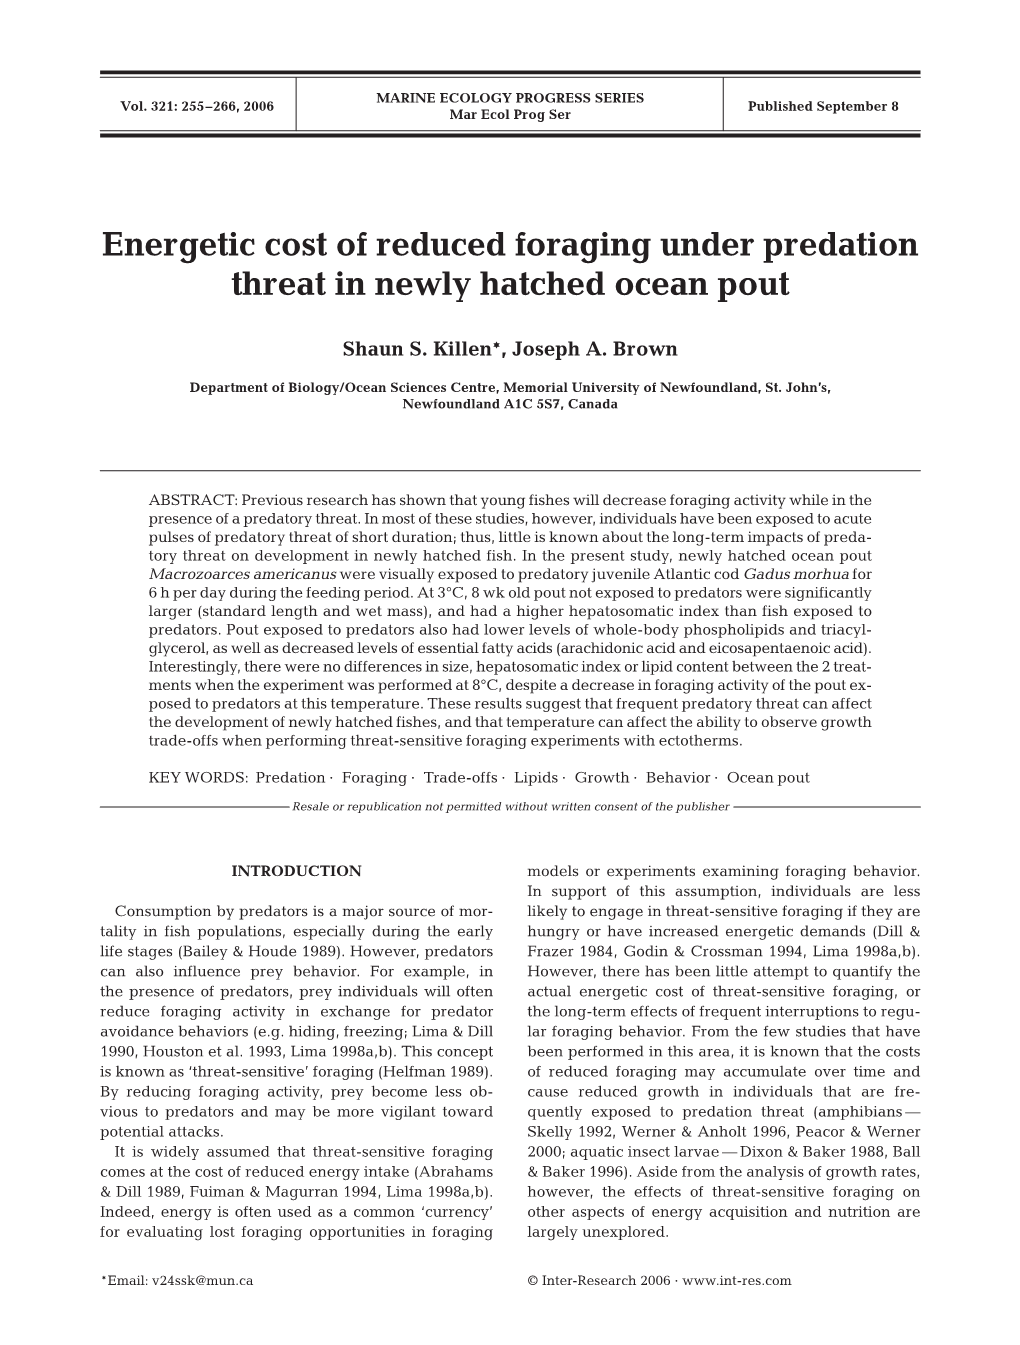 Energetic Cost of Reduced Foraging Under Predation Threat in Newly Hatched Ocean Pout